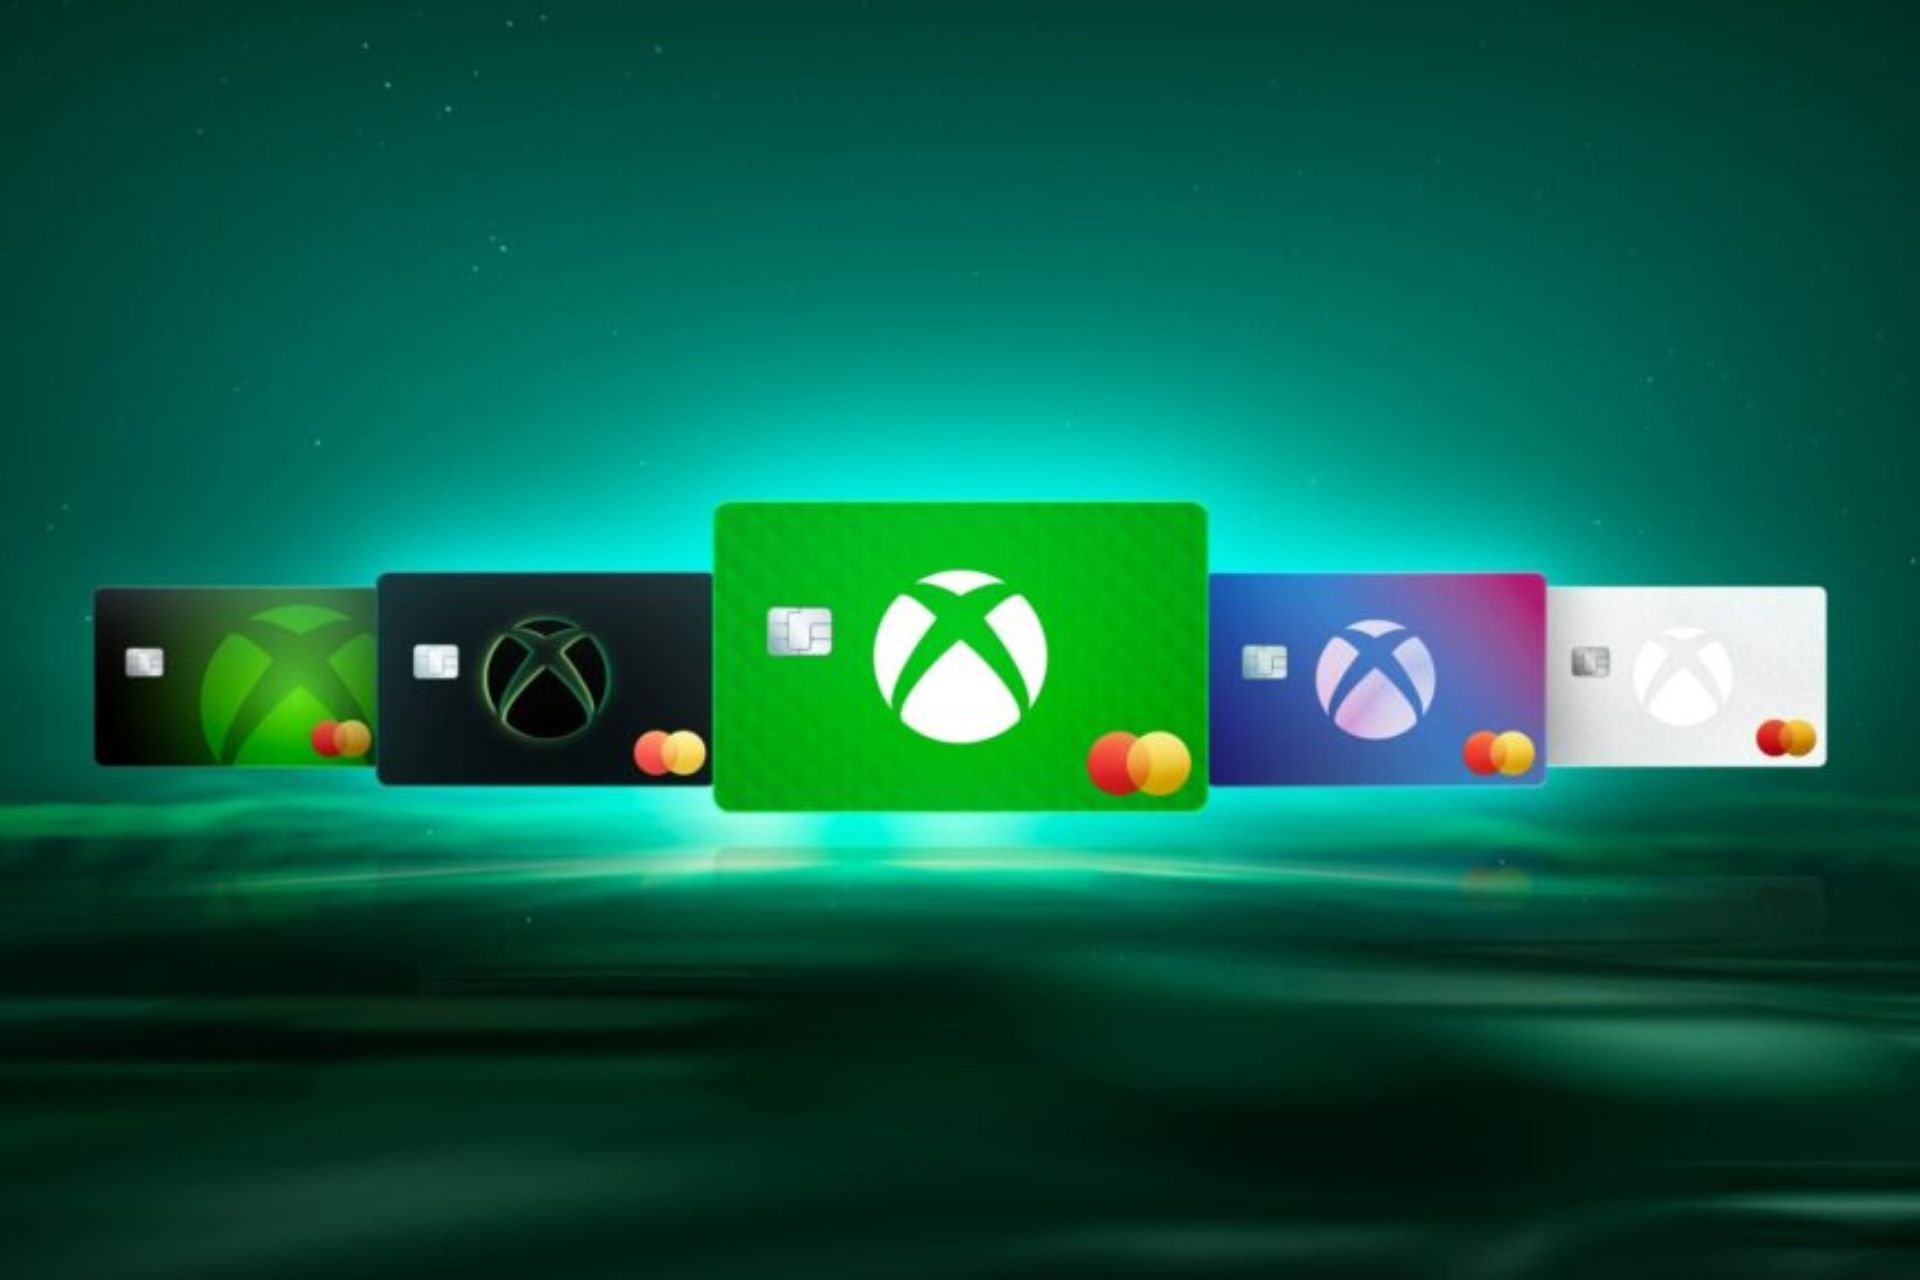 Microsoft has finally made Xbox Mastercard available to users